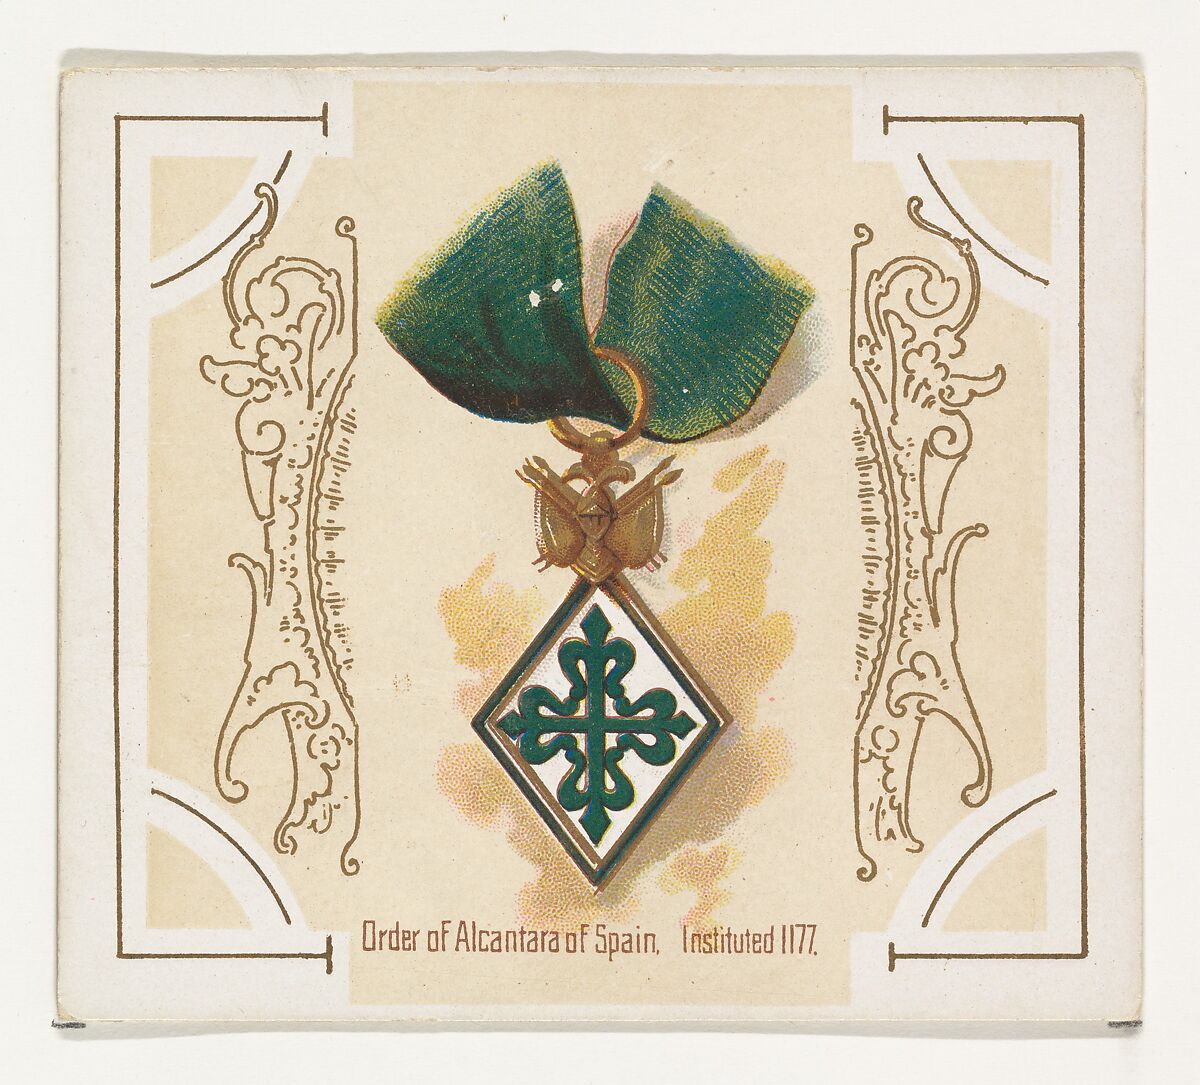 Order of Alcantara of Spain, Instituted 1177, from the World's Decorations series (N44) for Allen & Ginter Cigarettes, Issued by Allen &amp; Ginter (American, Richmond, Virginia), Commercial color lithograph 